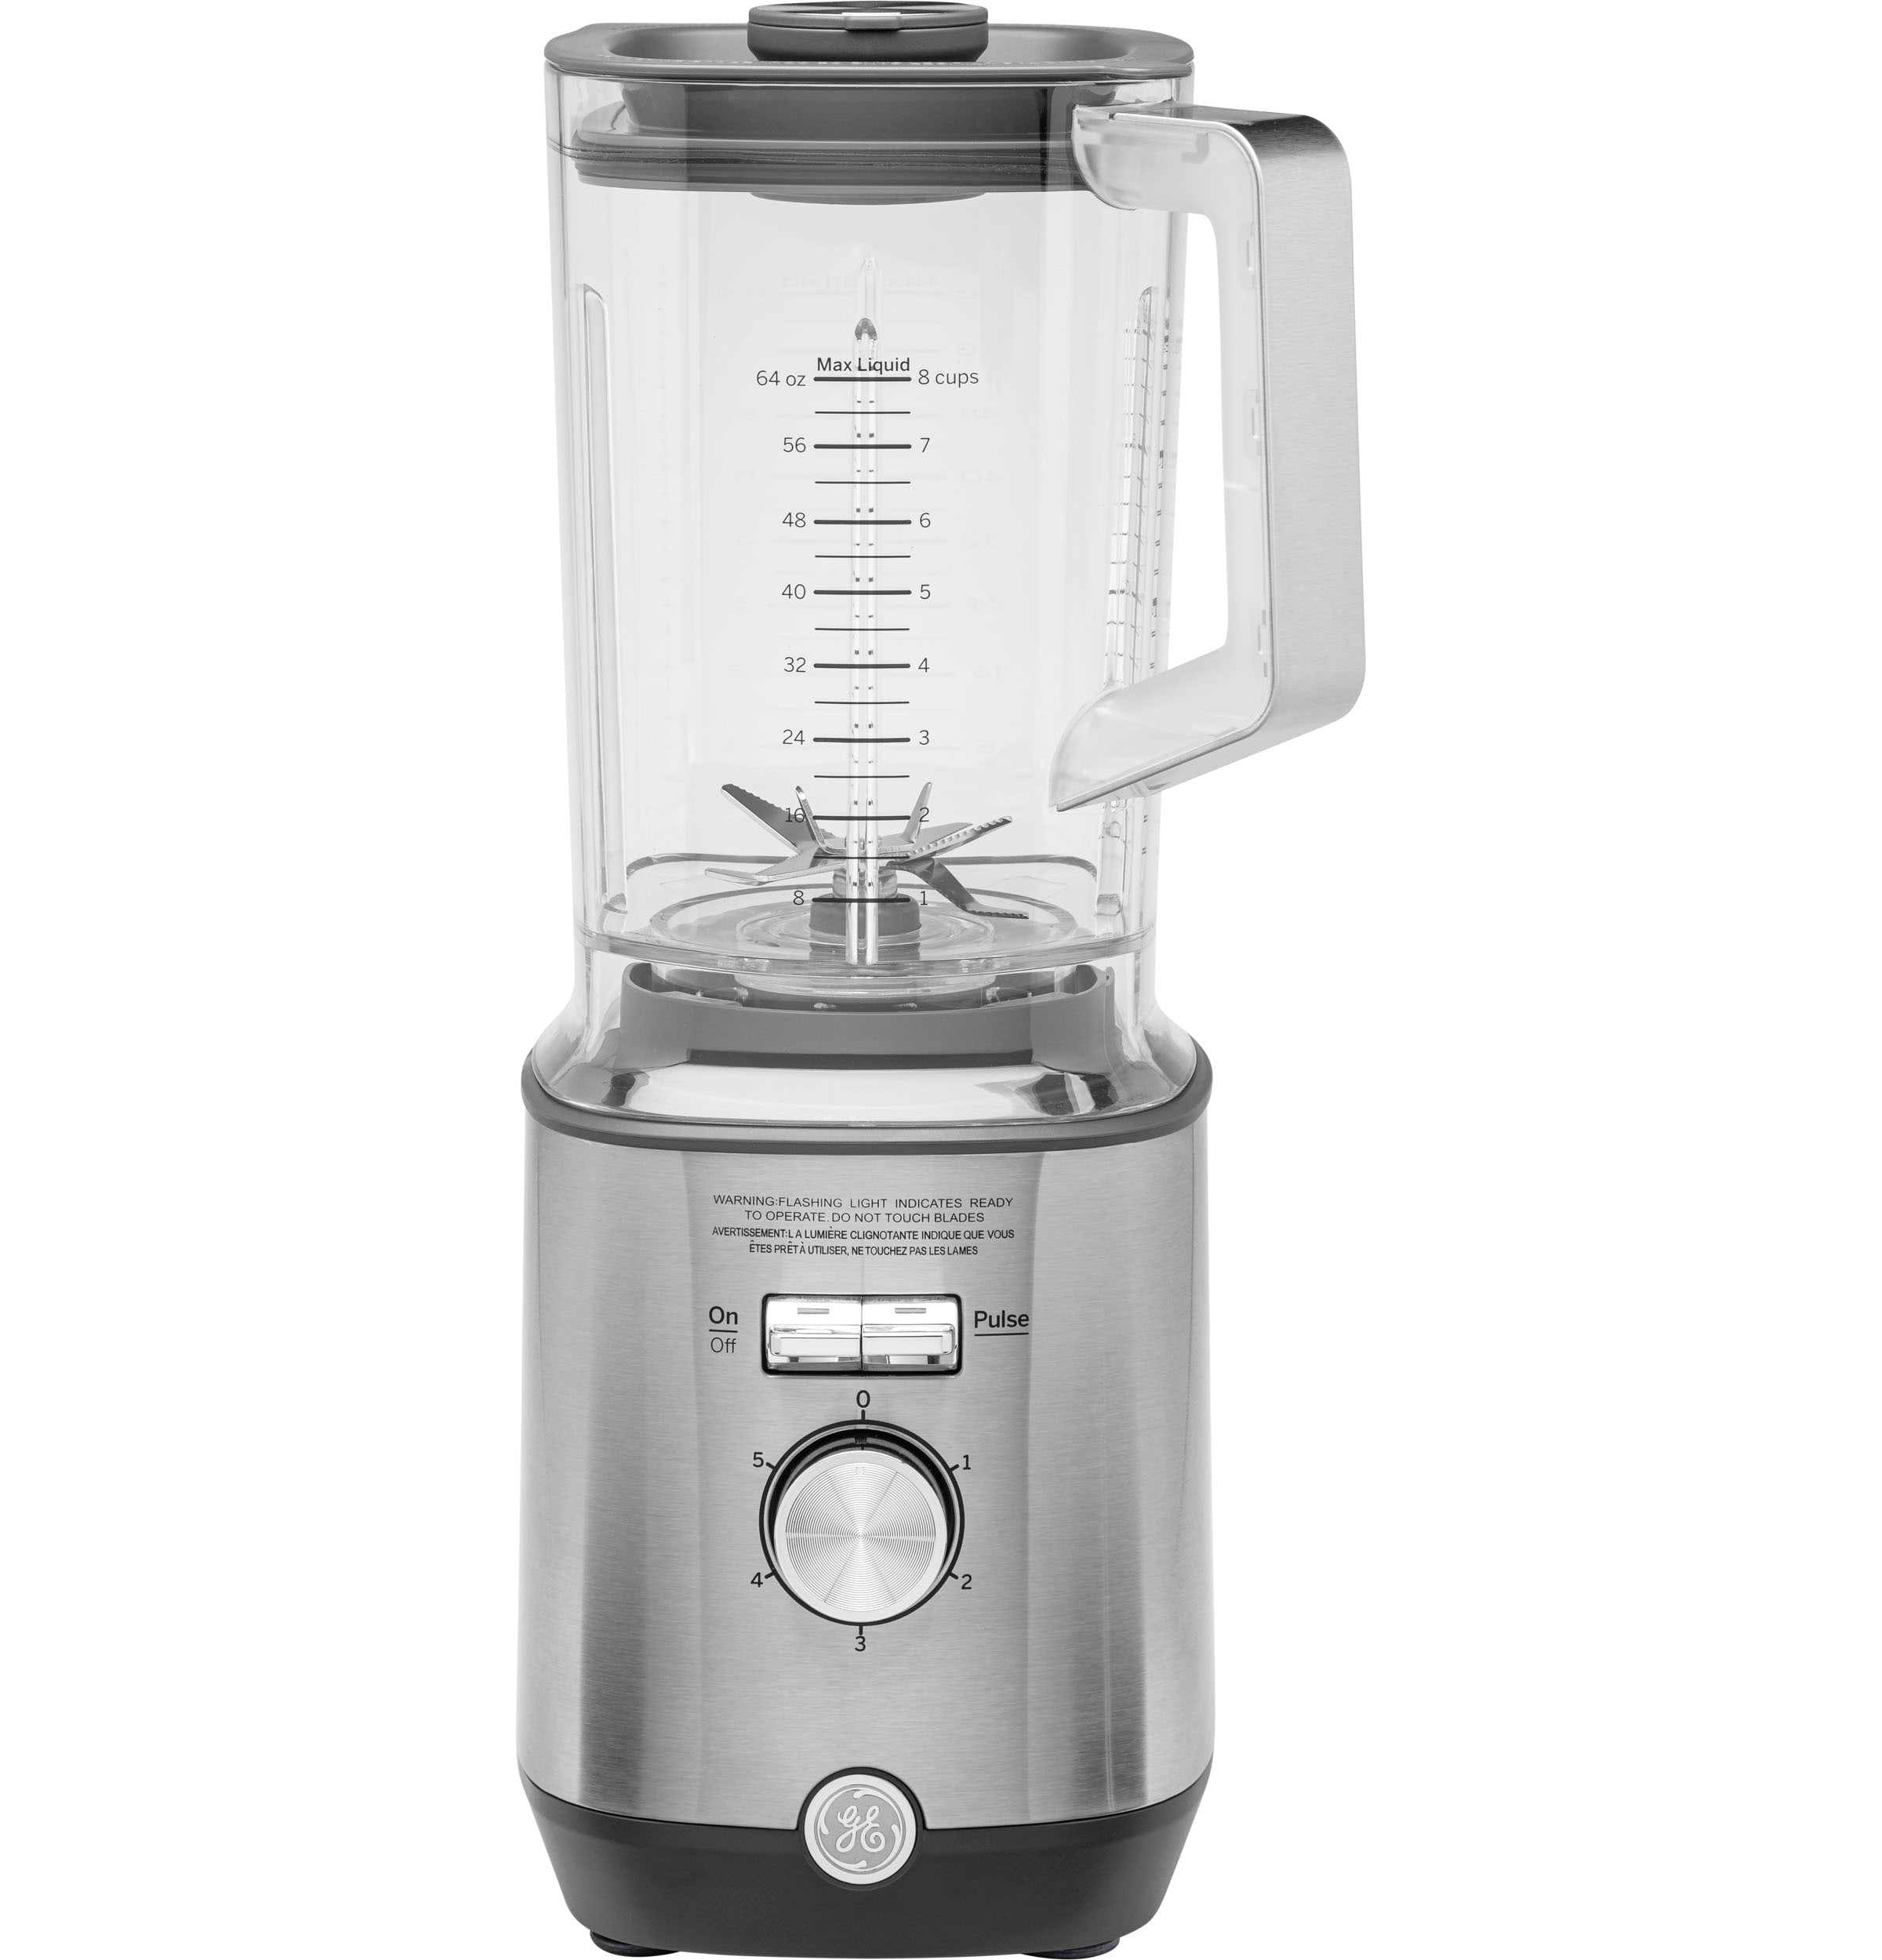  BLACK+DECKER FusionBlade Personal Blender with Two 20oz  Personal Blending Jars, Gray, PB1002G: Home & Kitchen